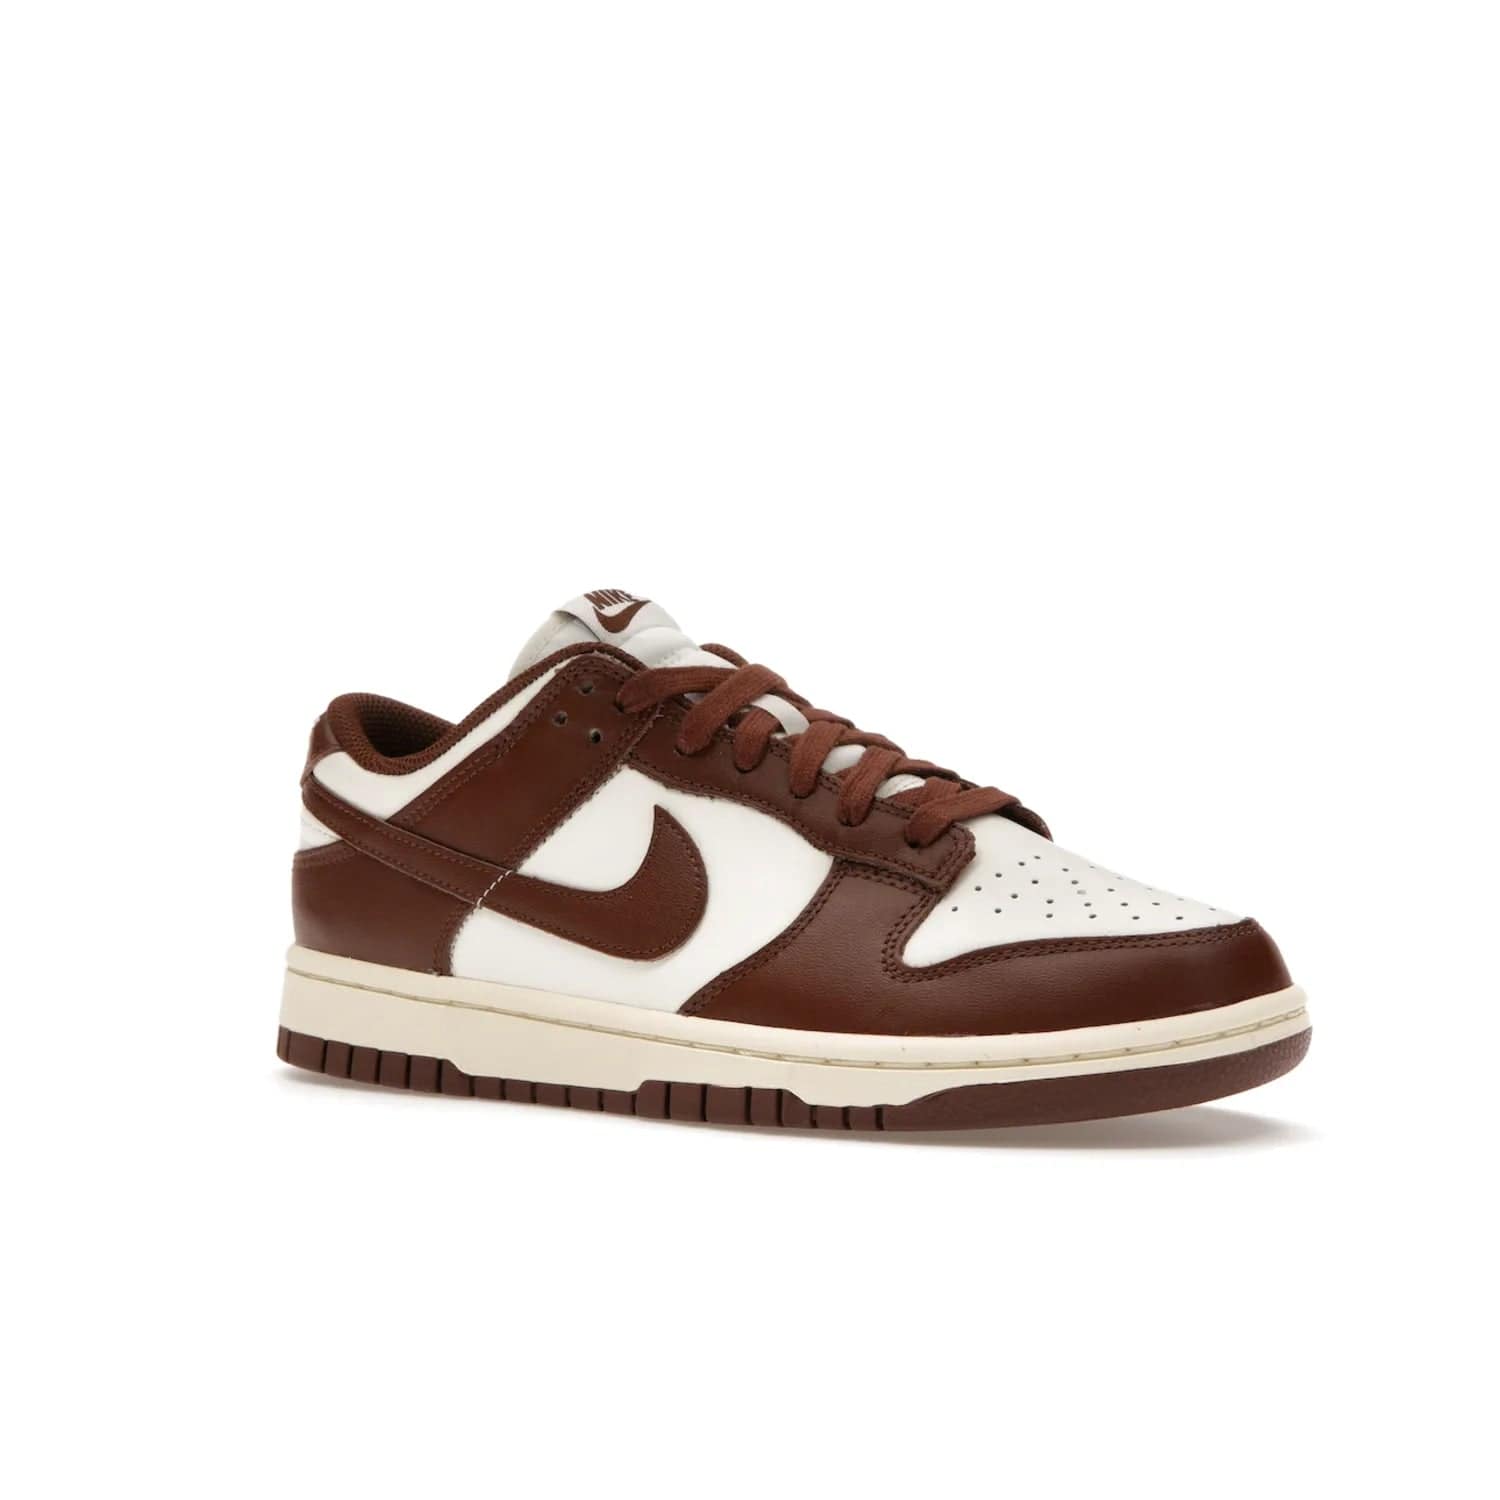 Nike Dunk Low Cacao Wow (Women's) - Image 4 - Only at www.BallersClubKickz.com - Revised
Get the Nike Dunk Low Cacao Wow and make a statement! Plush leather and a cool Cacao Wow finish bring together a unique mix of comfort and fashion that will turn heads. Boosted with a Coconut Milk hue. Shop today.